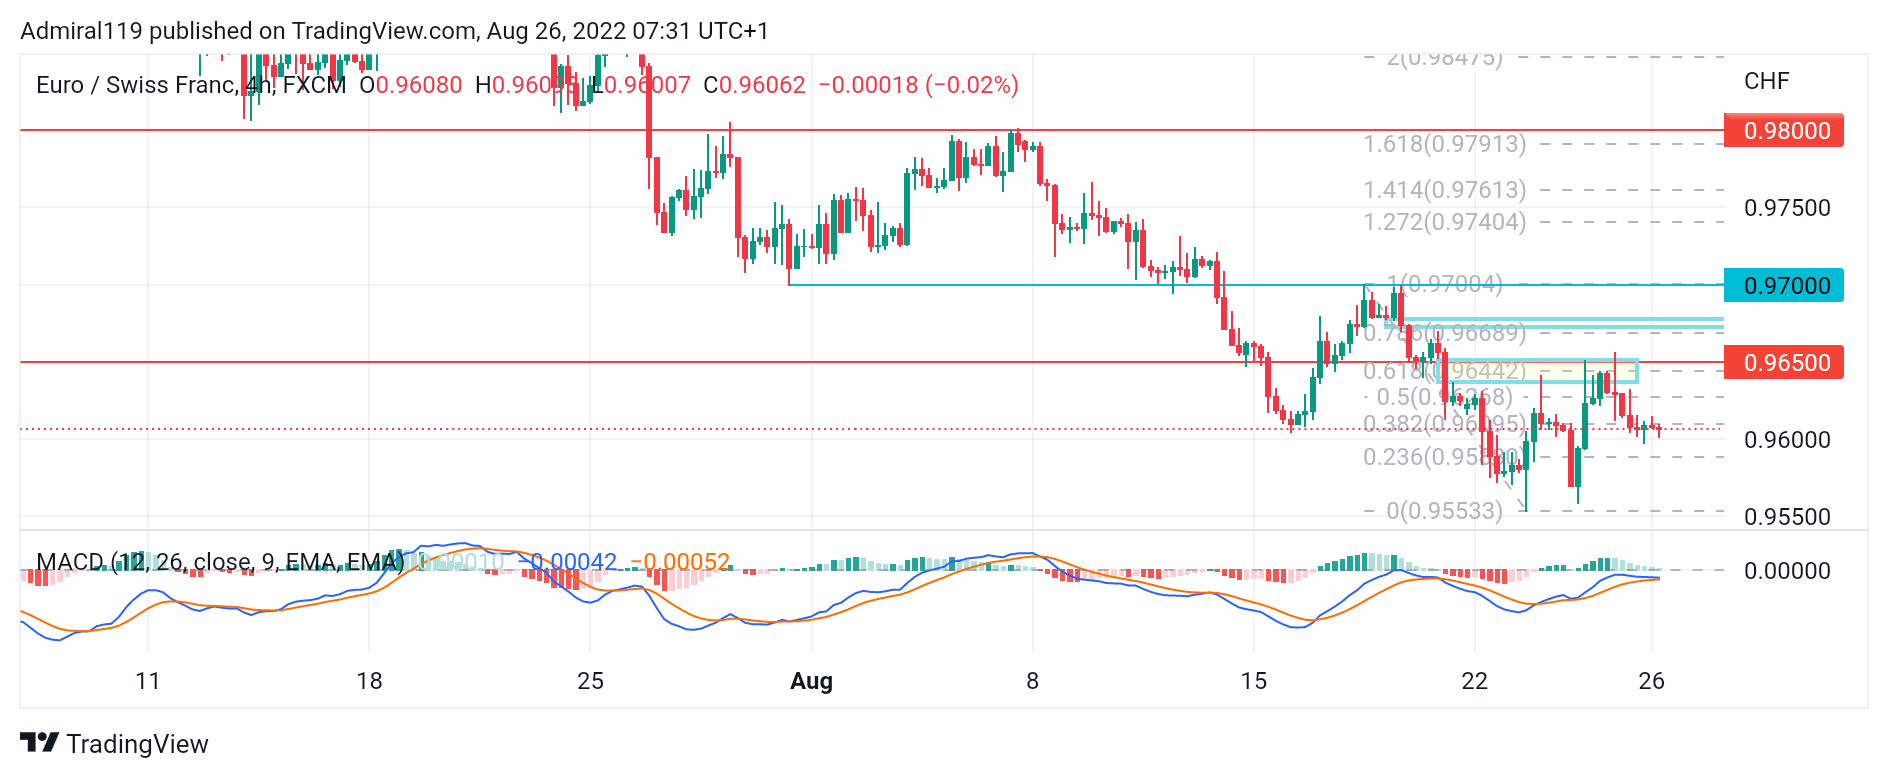 EURCHF Bulls Get Squeezed Out as the Market Keeps Crashing Downward